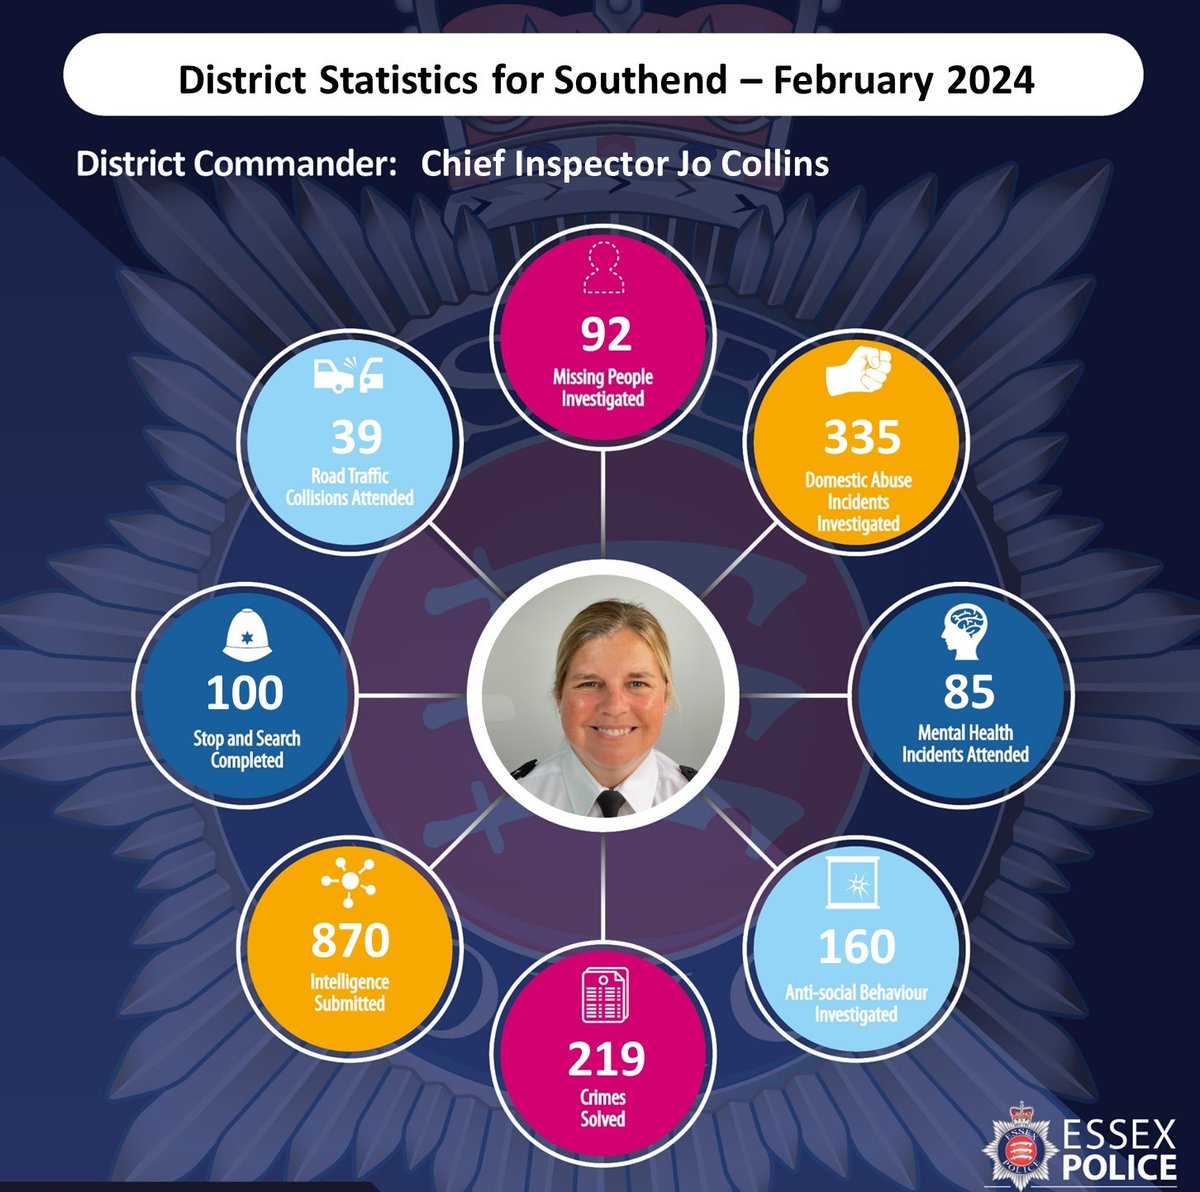 The below infographic provides a small snapshot of the work undertaken in February 2024 across the Southend District. #keepingessexsafe